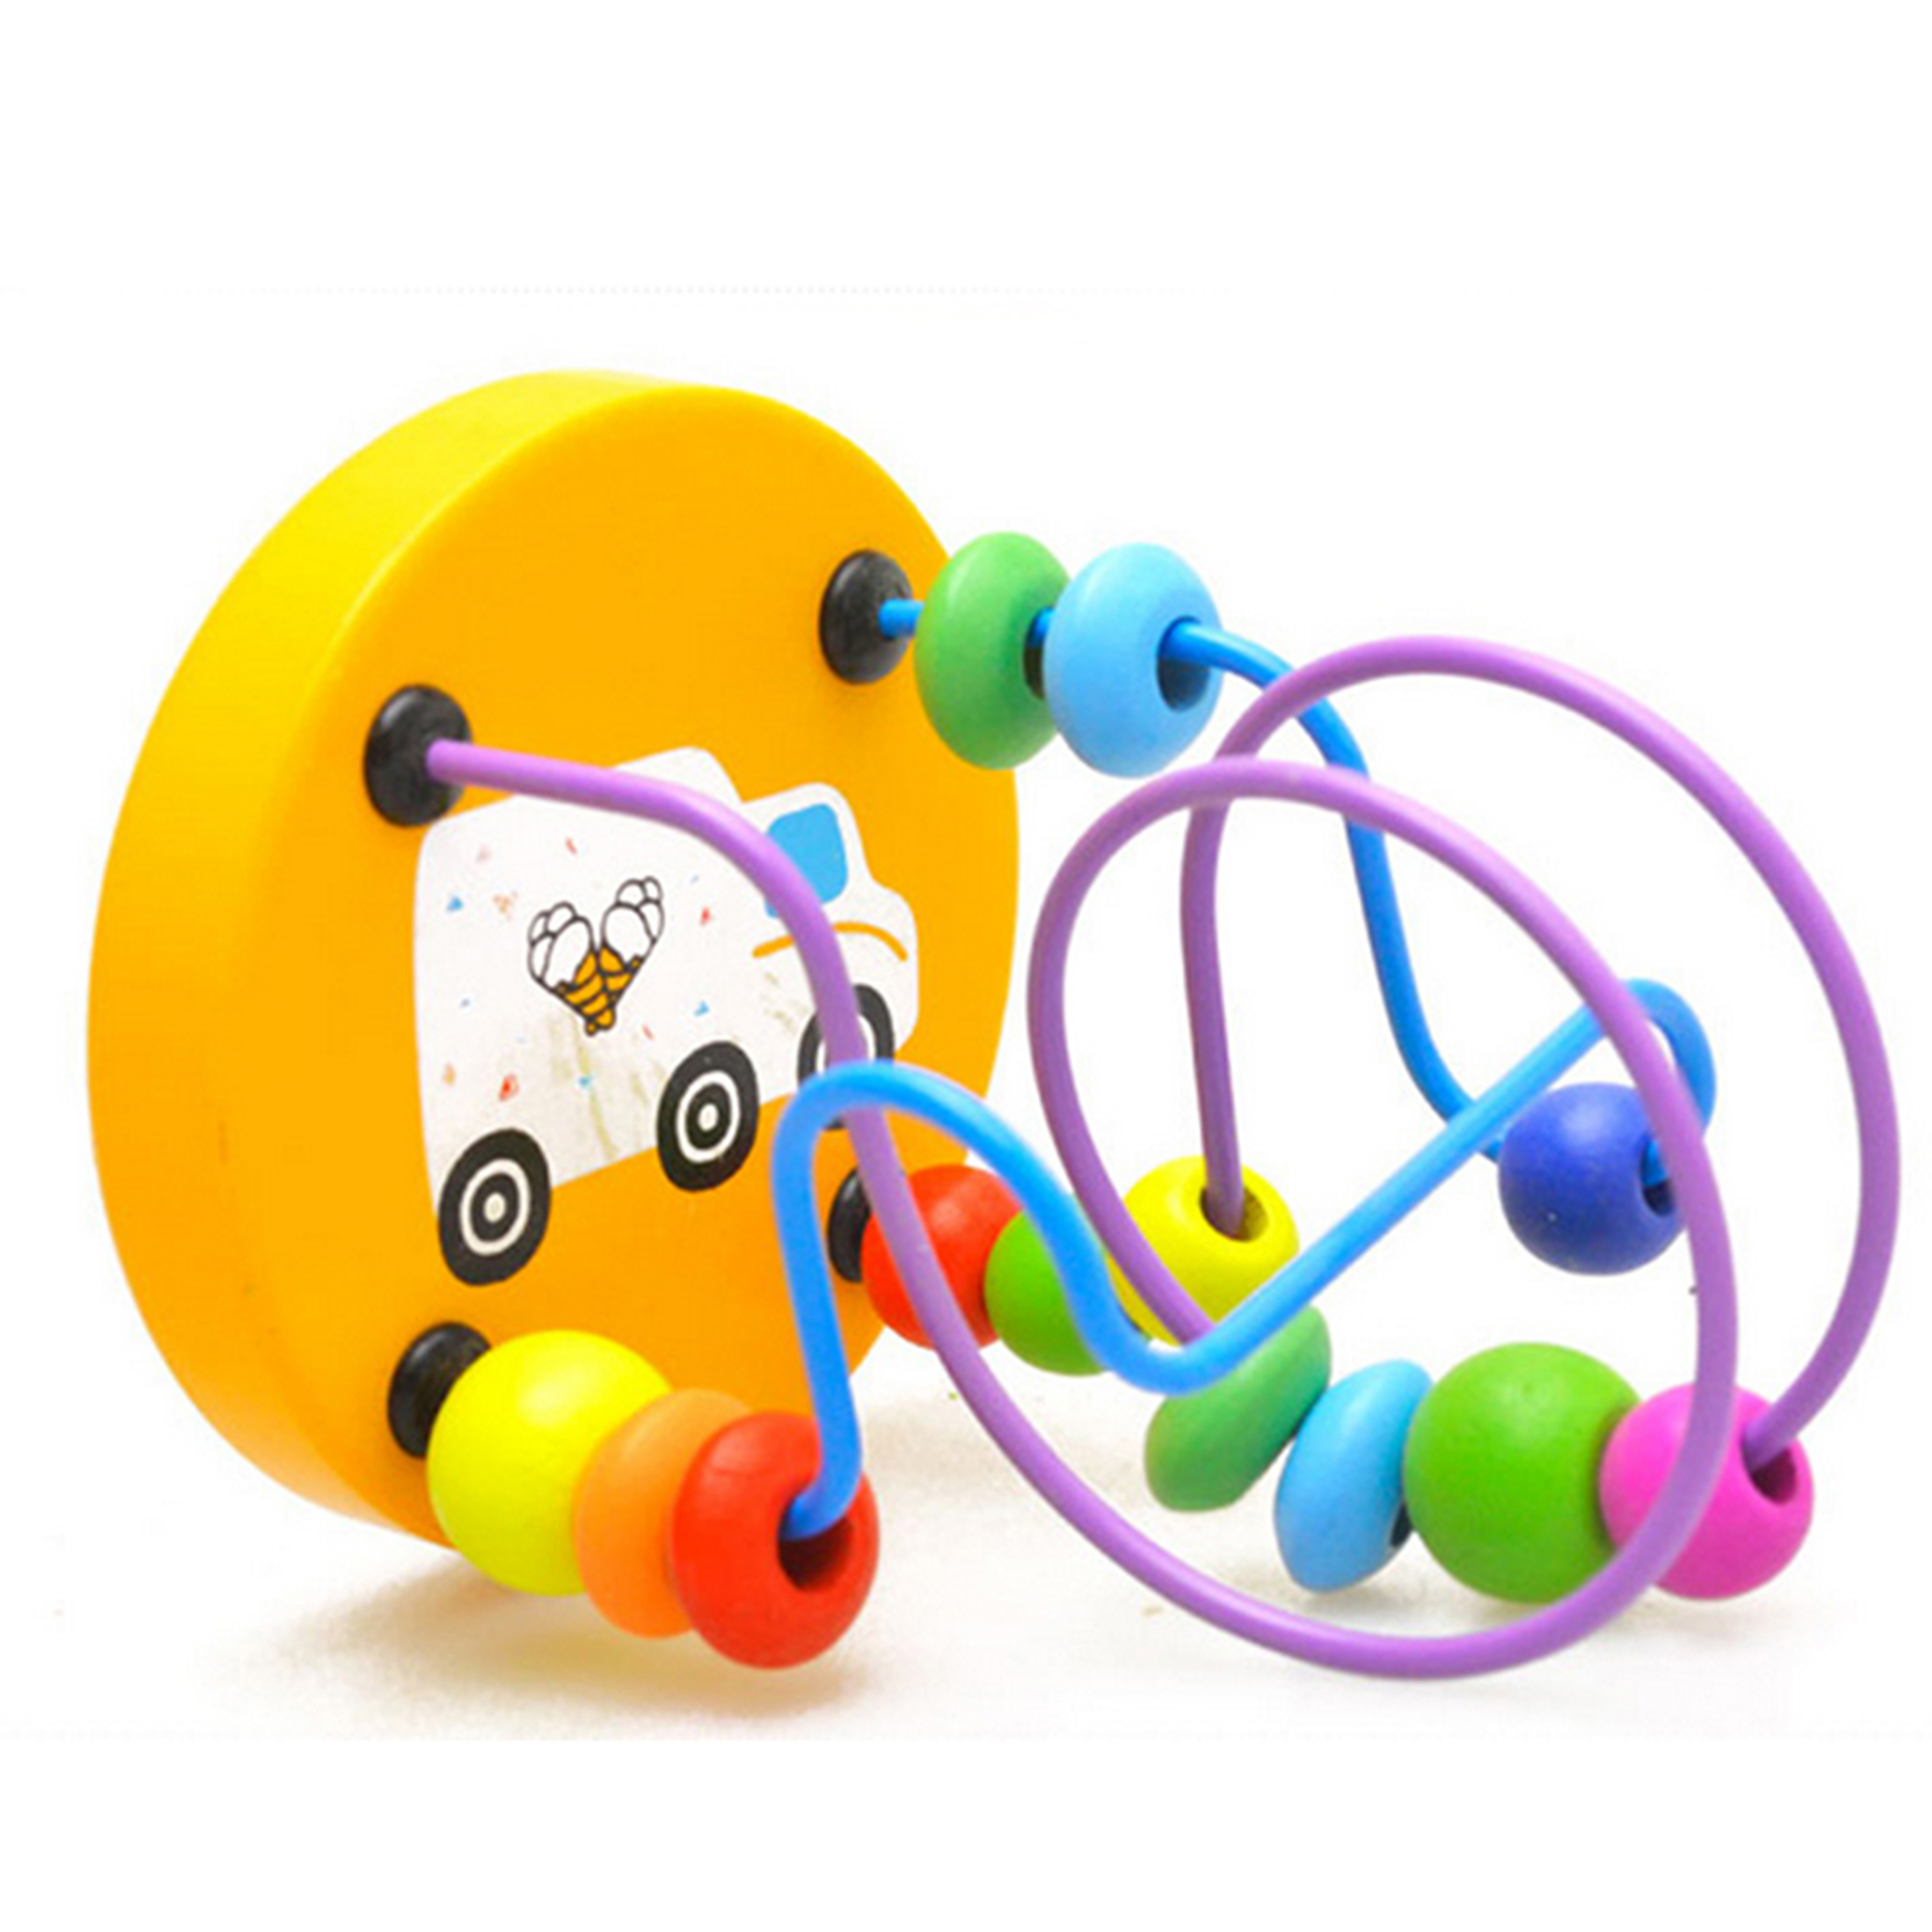 Wire Maze Roller Coaster for Toddlers Toy Gift Child Kids Colorful Wooden Mini Around Bead Educational Game Toy for Kids Sliding Beads On Twists Wire - image 5 of 6